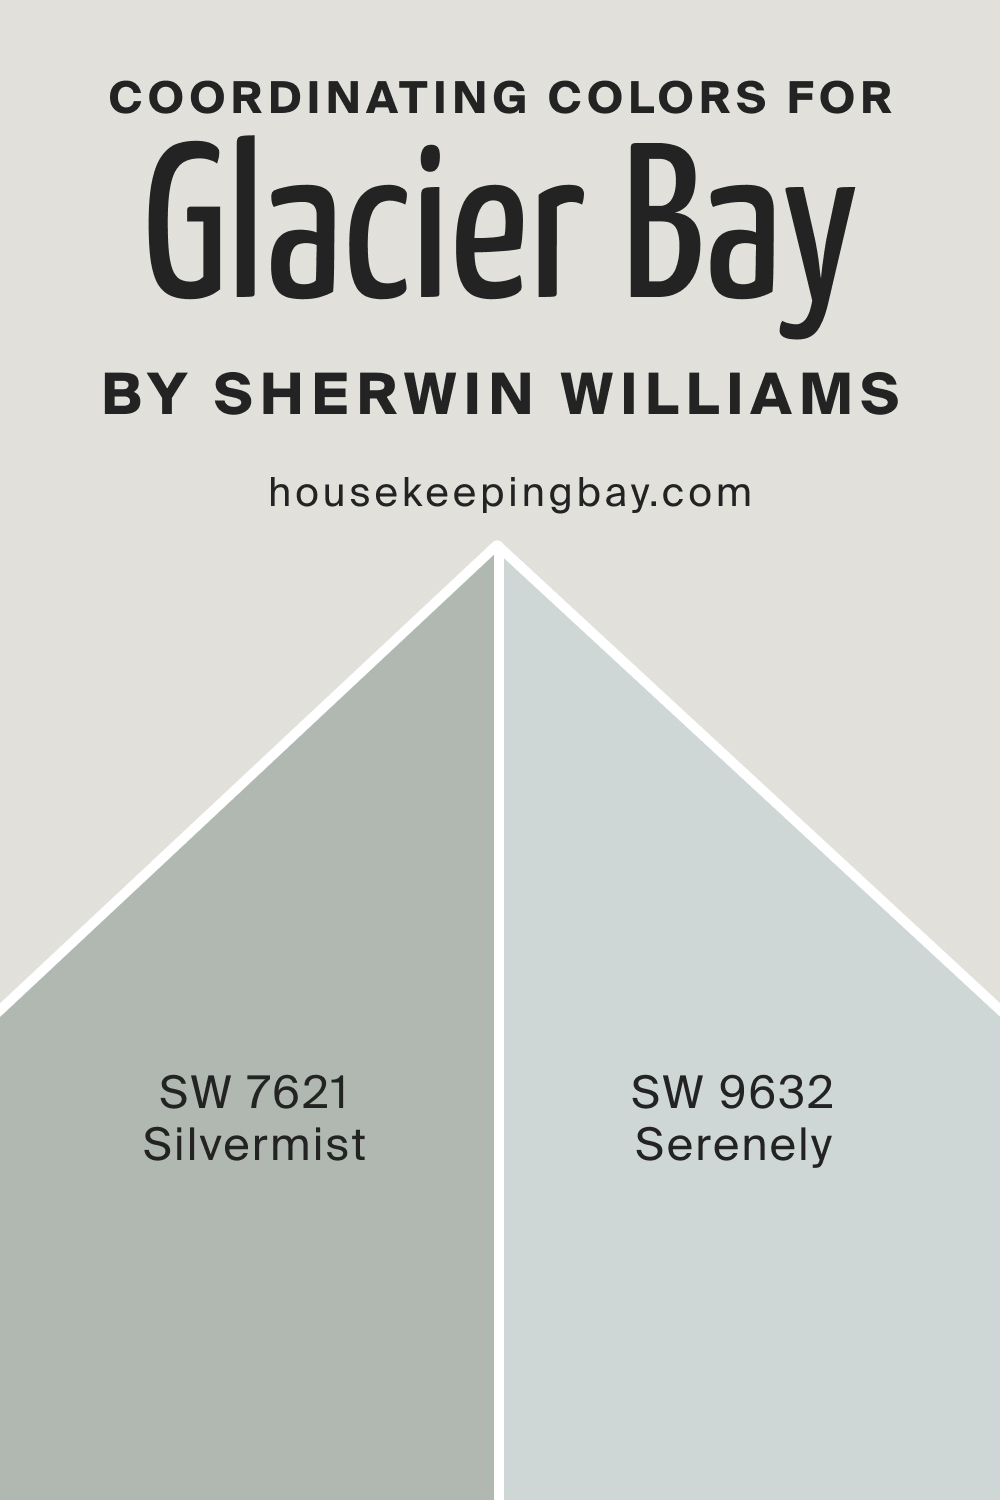 Coordinating Colors for SW 9626 Glacier Bay by Sherwin Williams